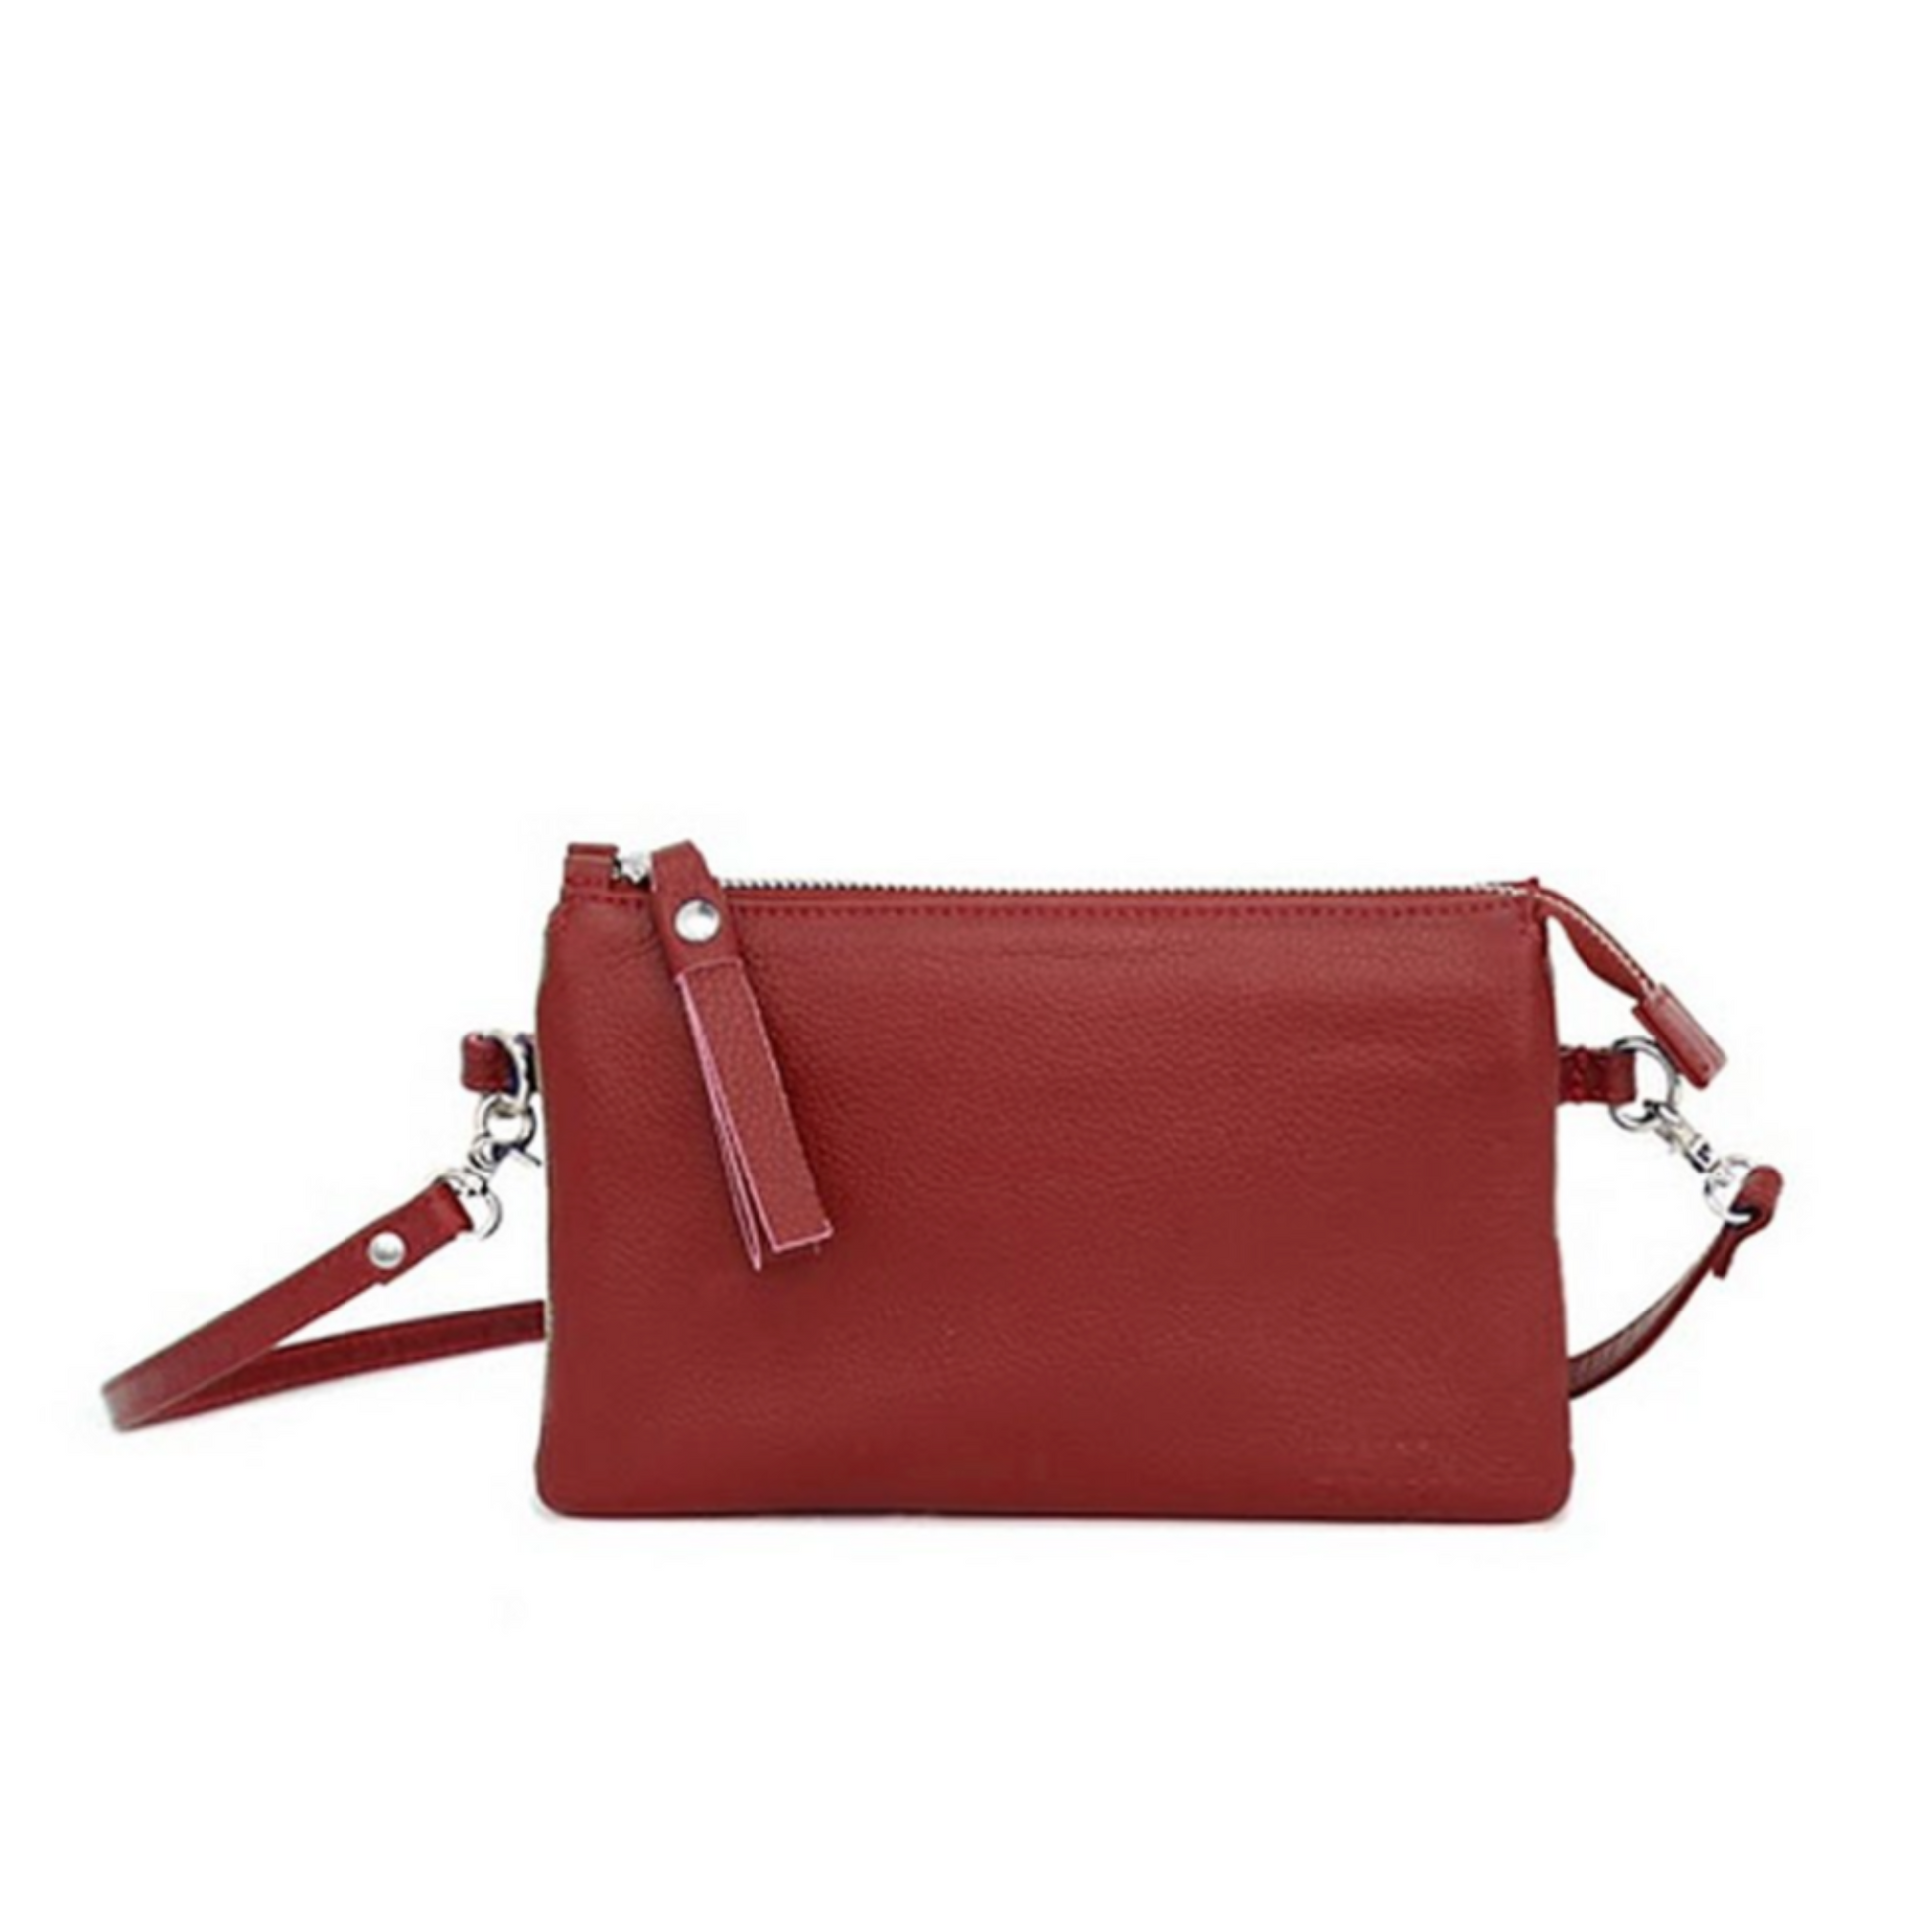 Lumi Venla All-in-One Pouch, Red Pear (8599881285919)